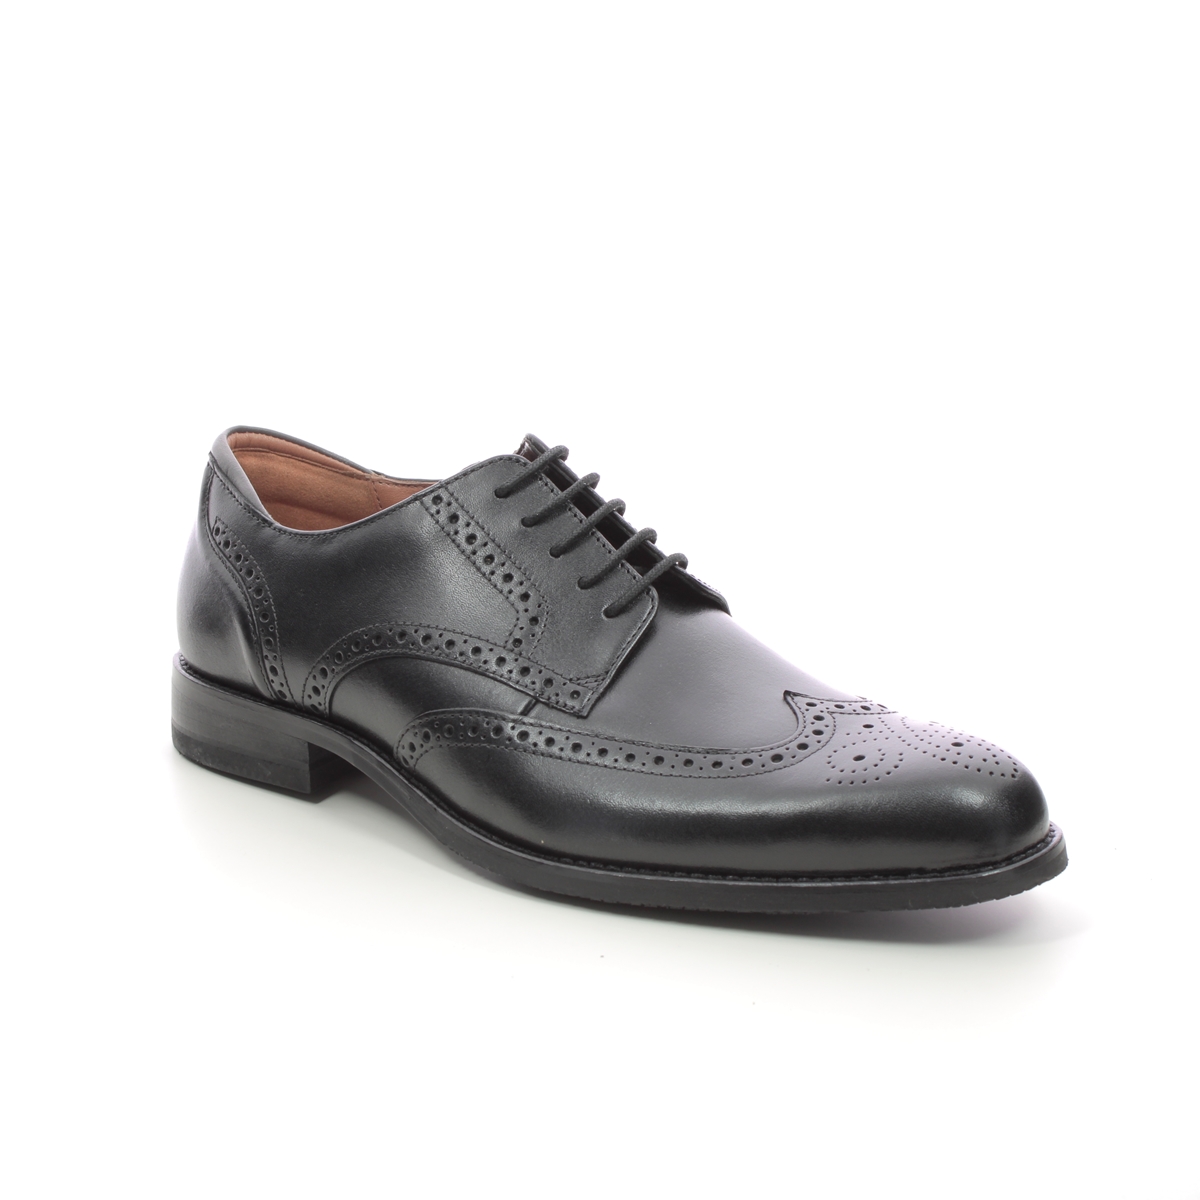 Clarks Craftarlo Limit Black Leather Mens Brogues 714527G In Size 8 In Plain Black Leather G Width Fitting